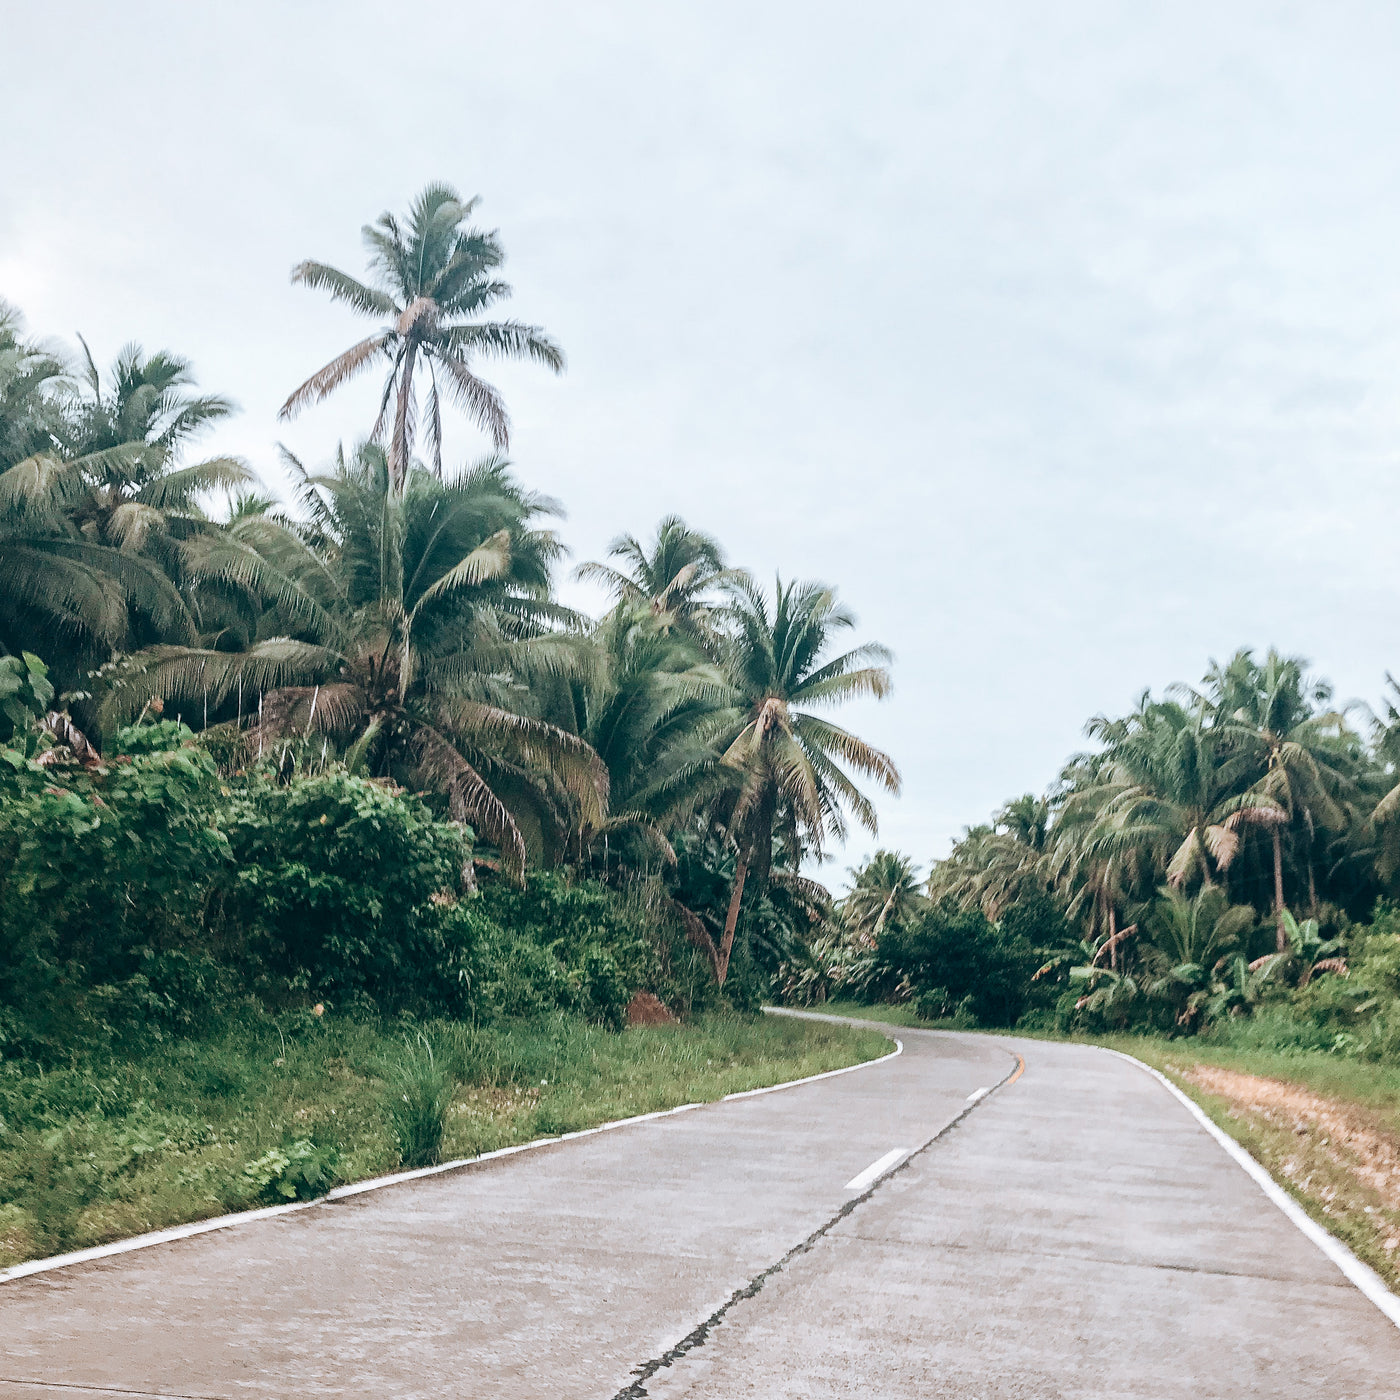 A quiet road with palm trees on either side on Siargao Island, Philippines